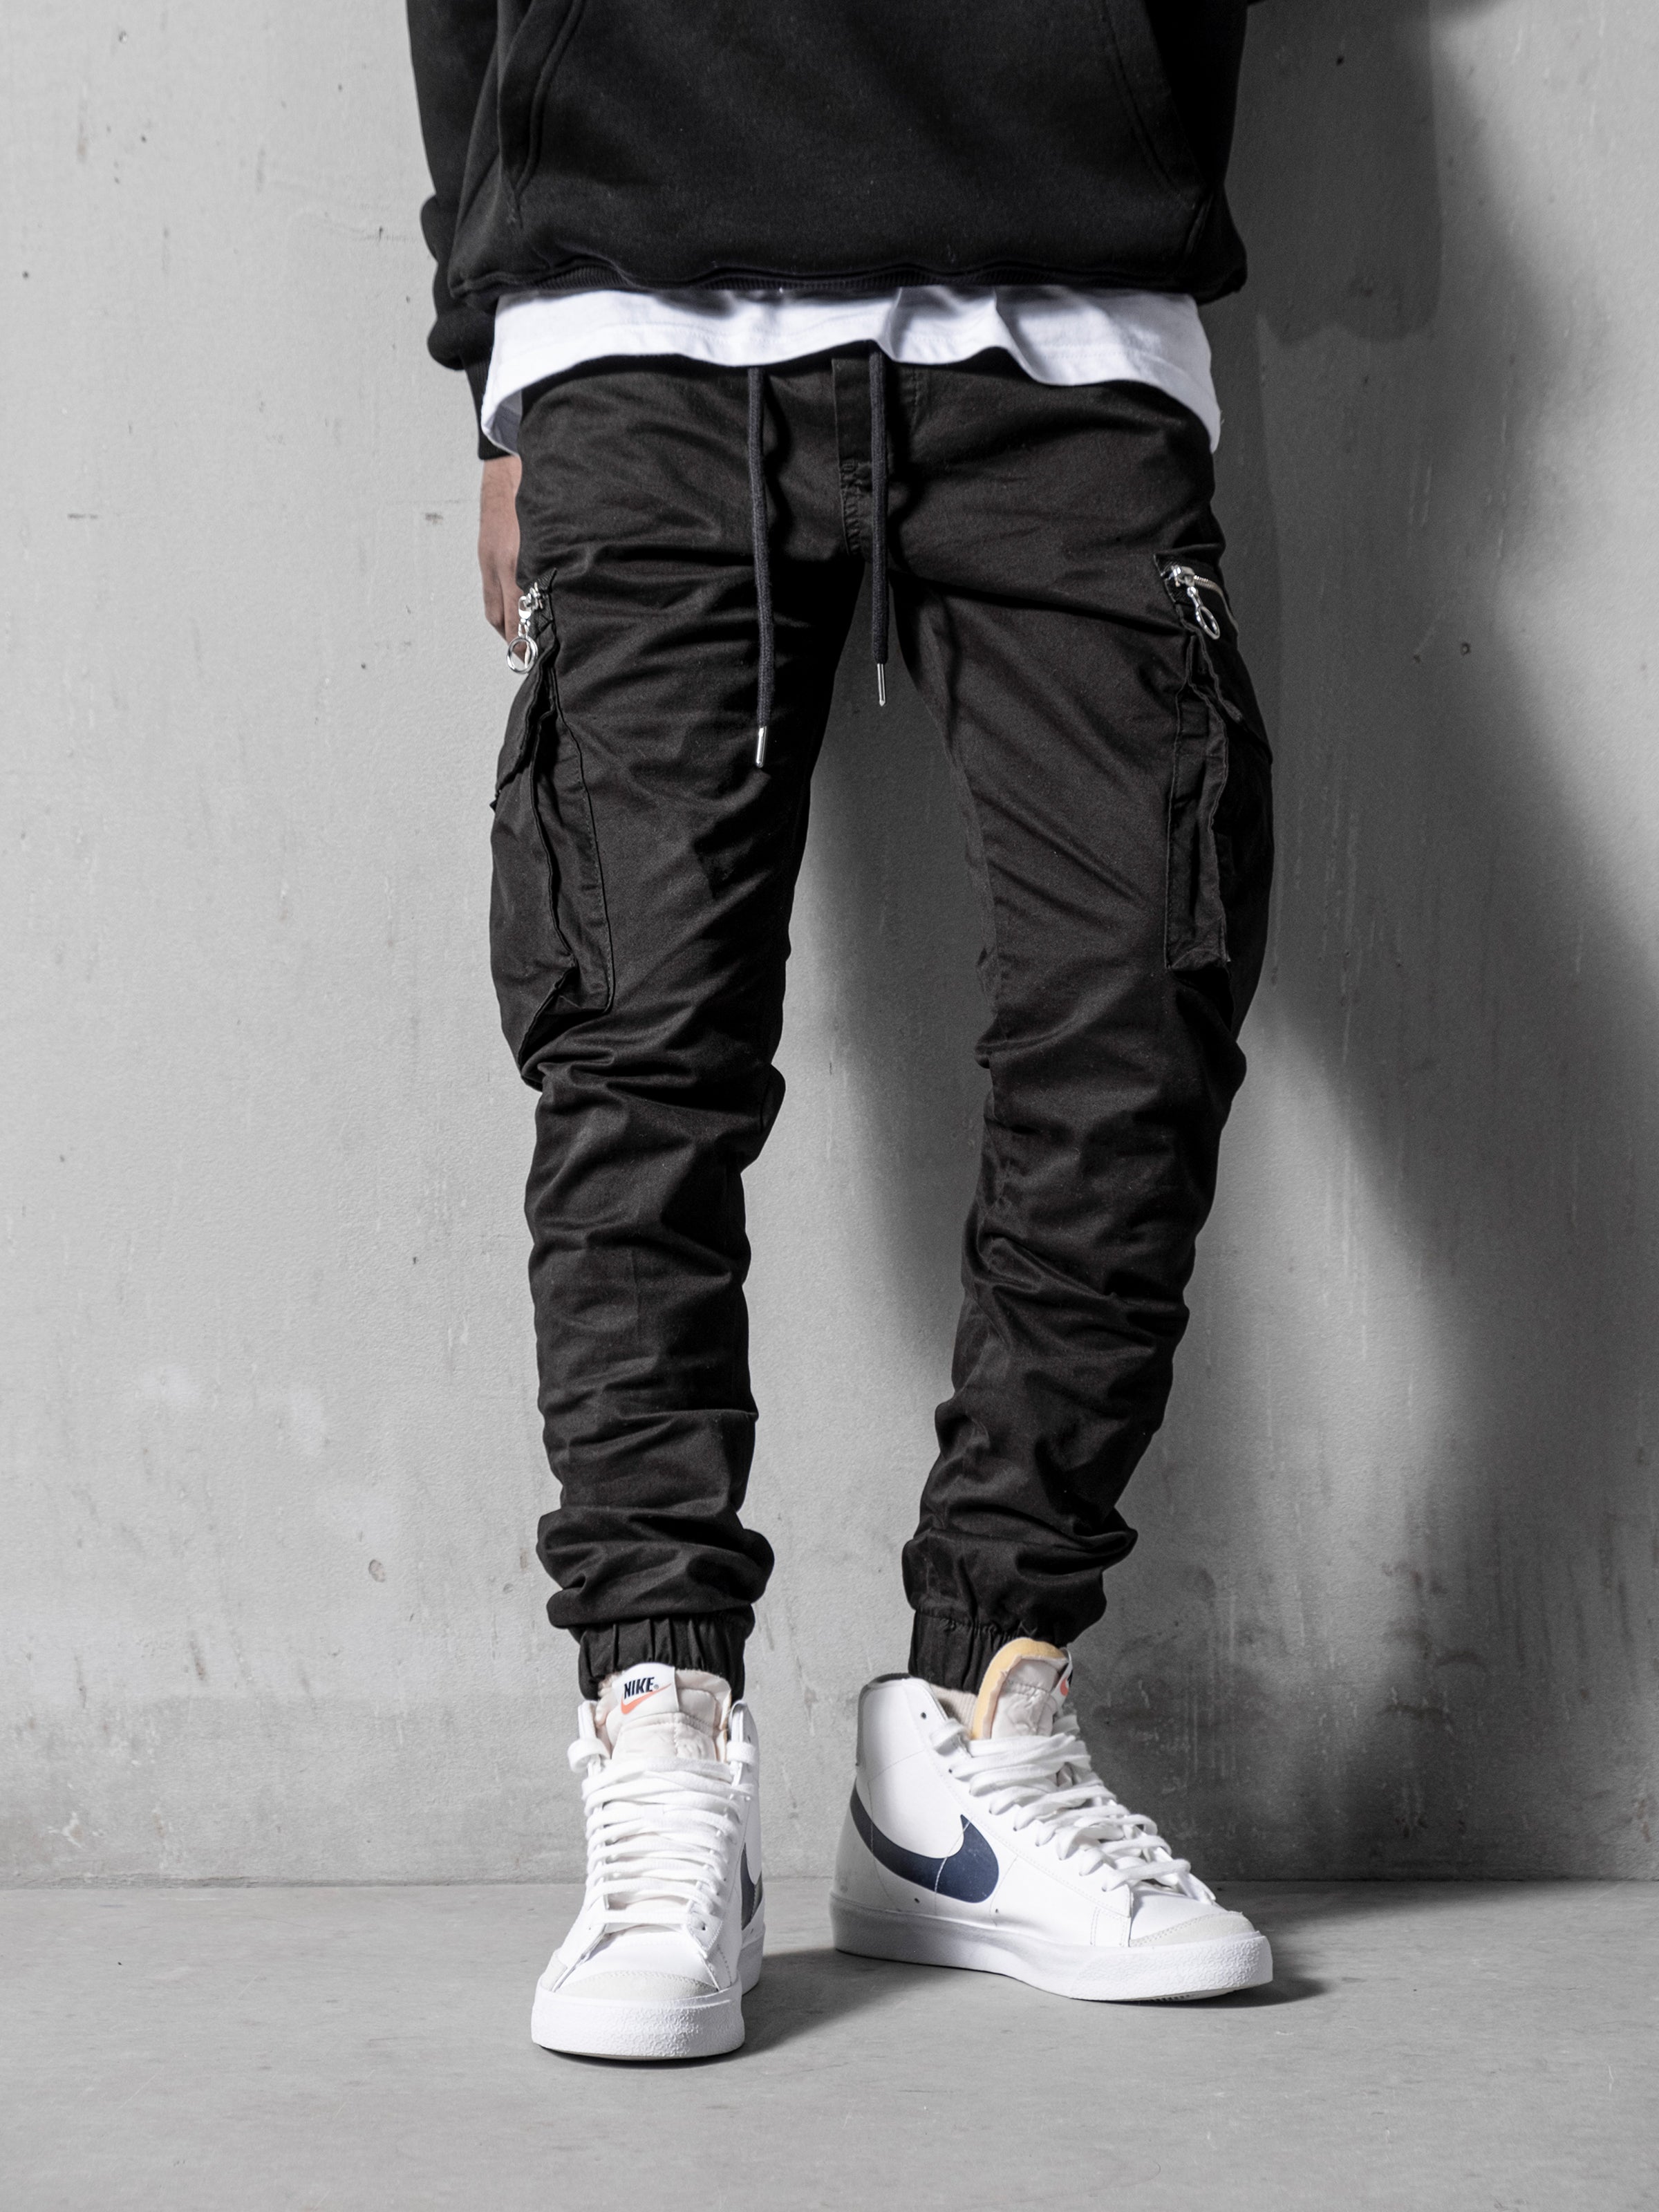 Mens Cargo Pants With Straps | Urban Streetwear